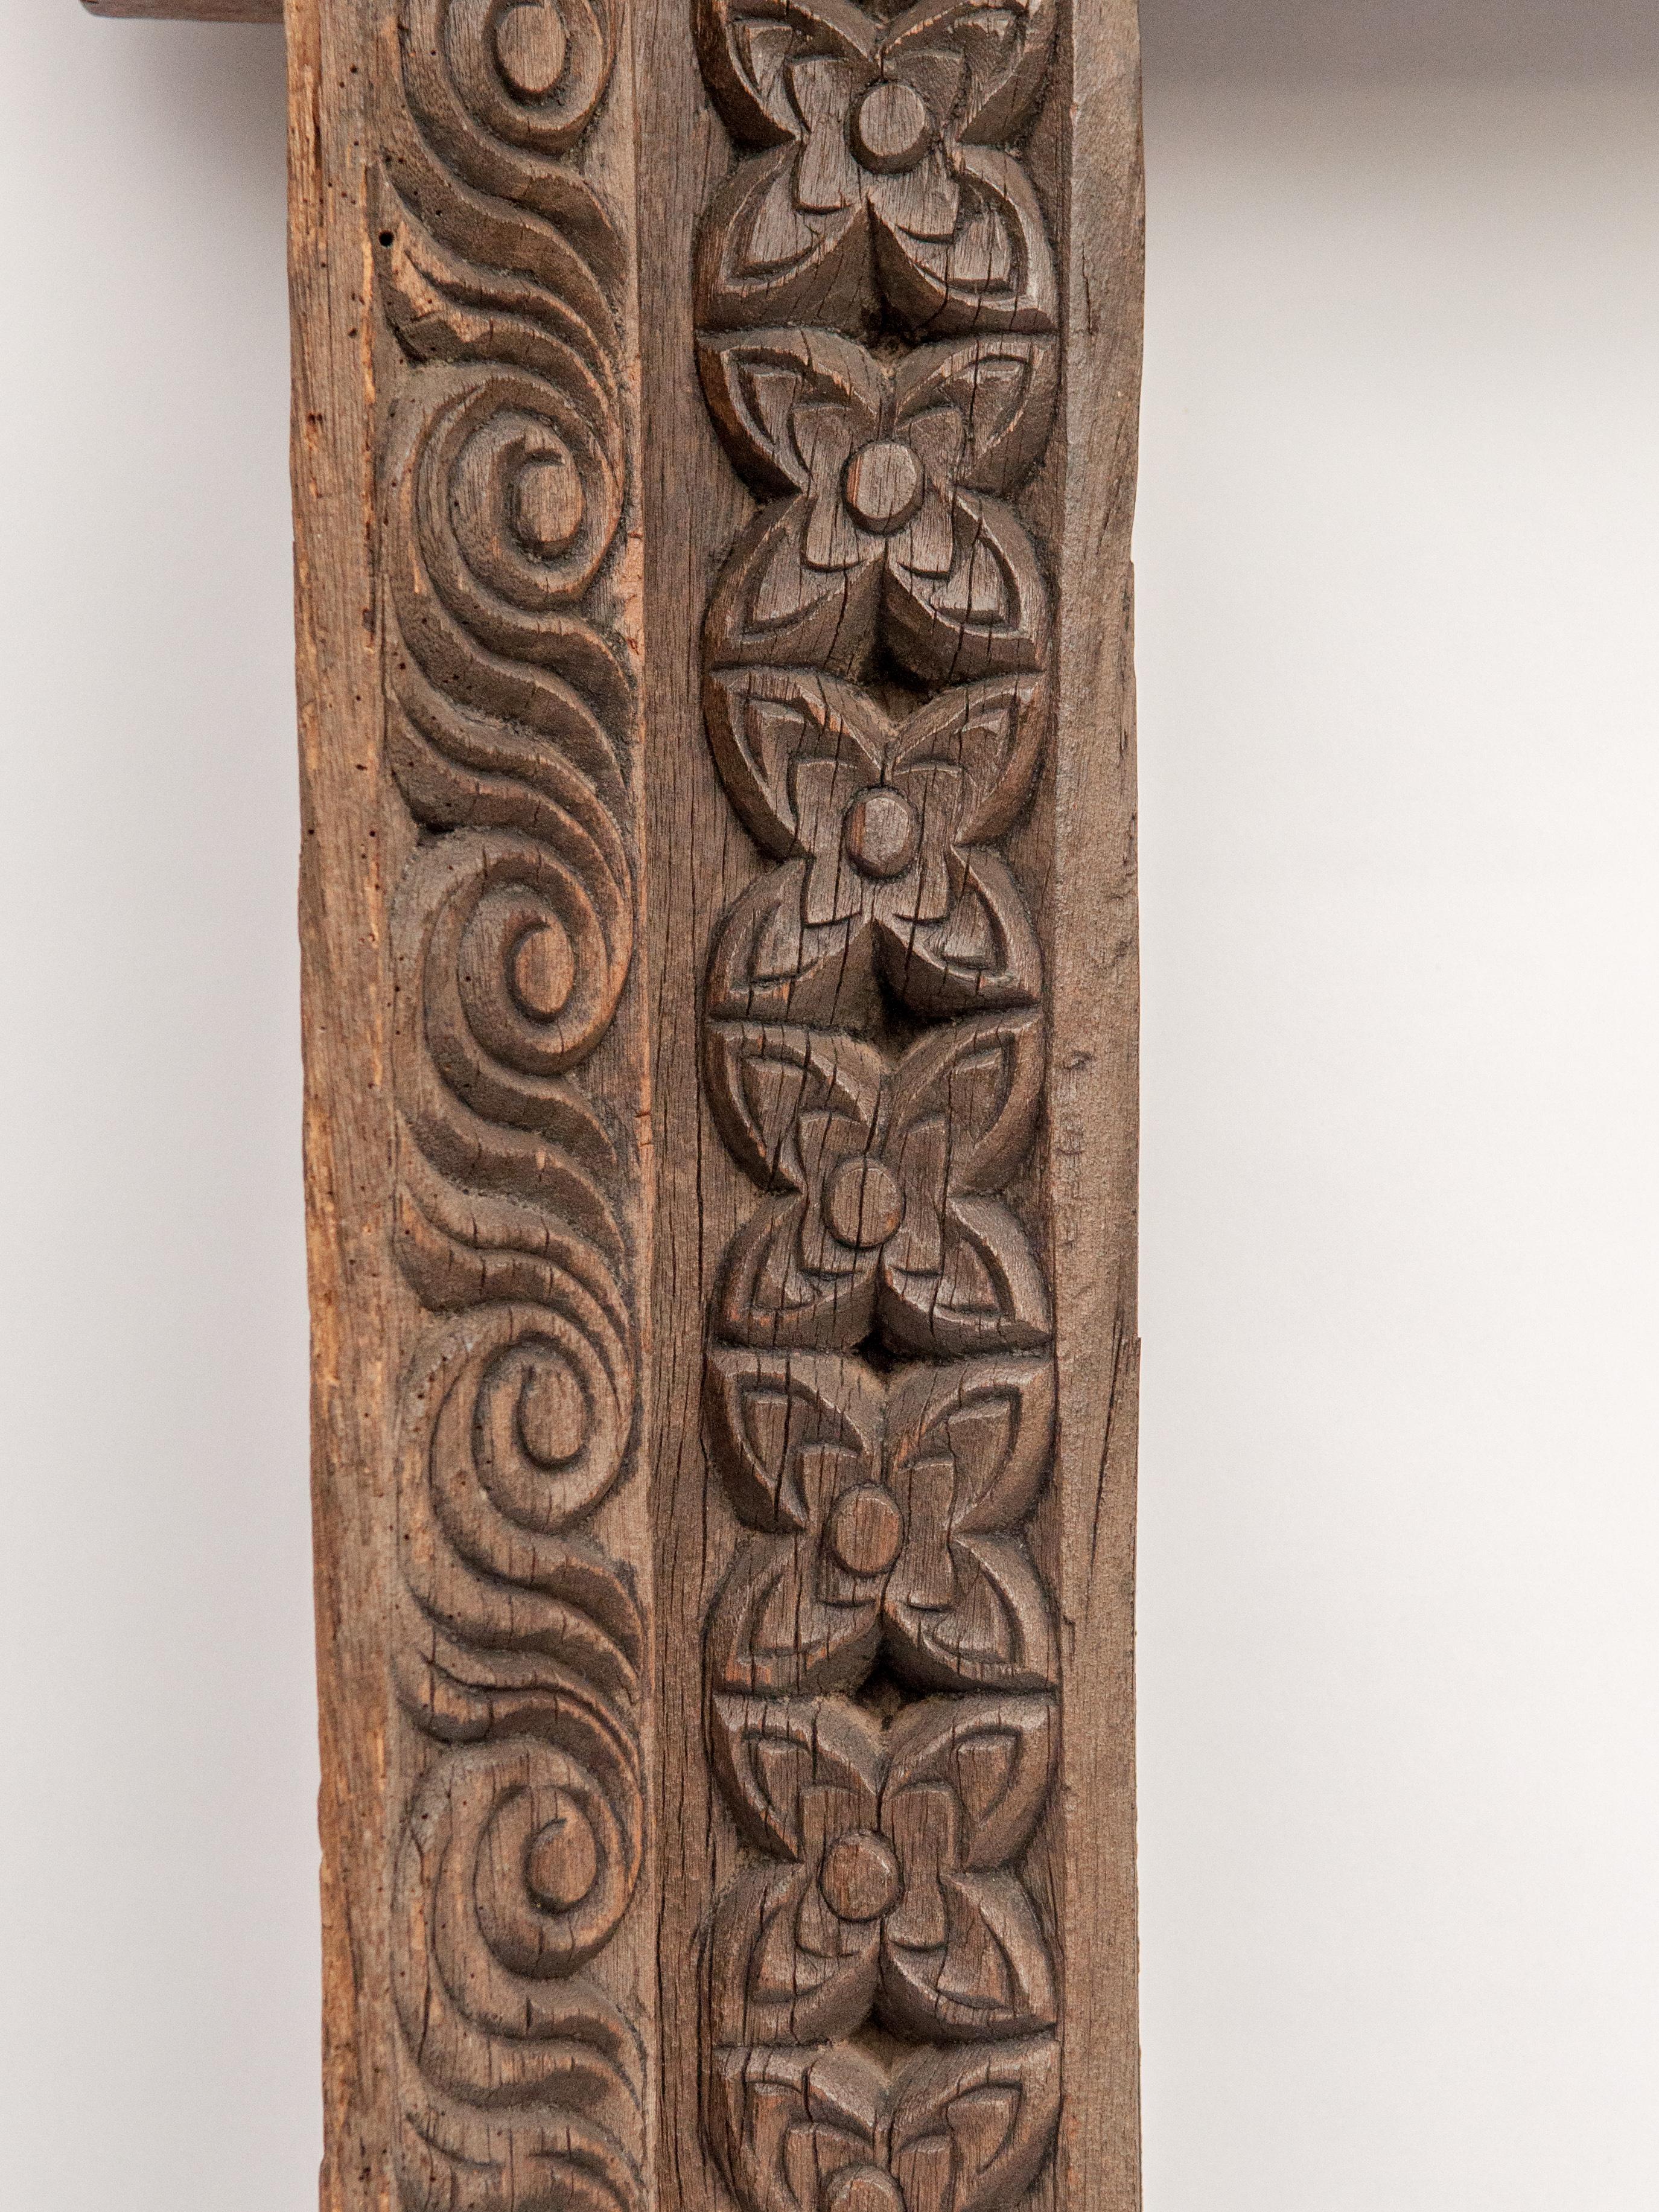 Hand-Carved Hand Carved Wooden Window or Mirror Frame, Late 19th Century, Nepal